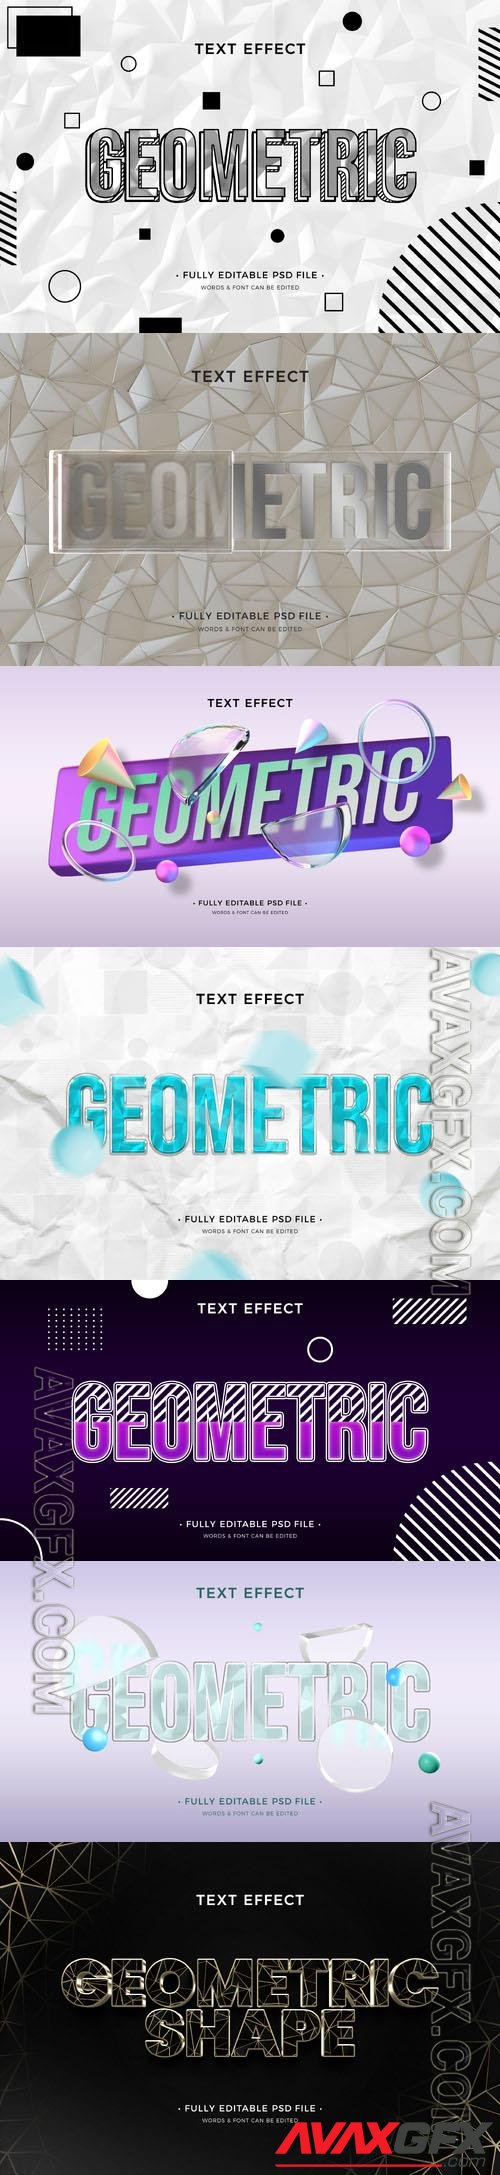 PSD geometric shapes text effect